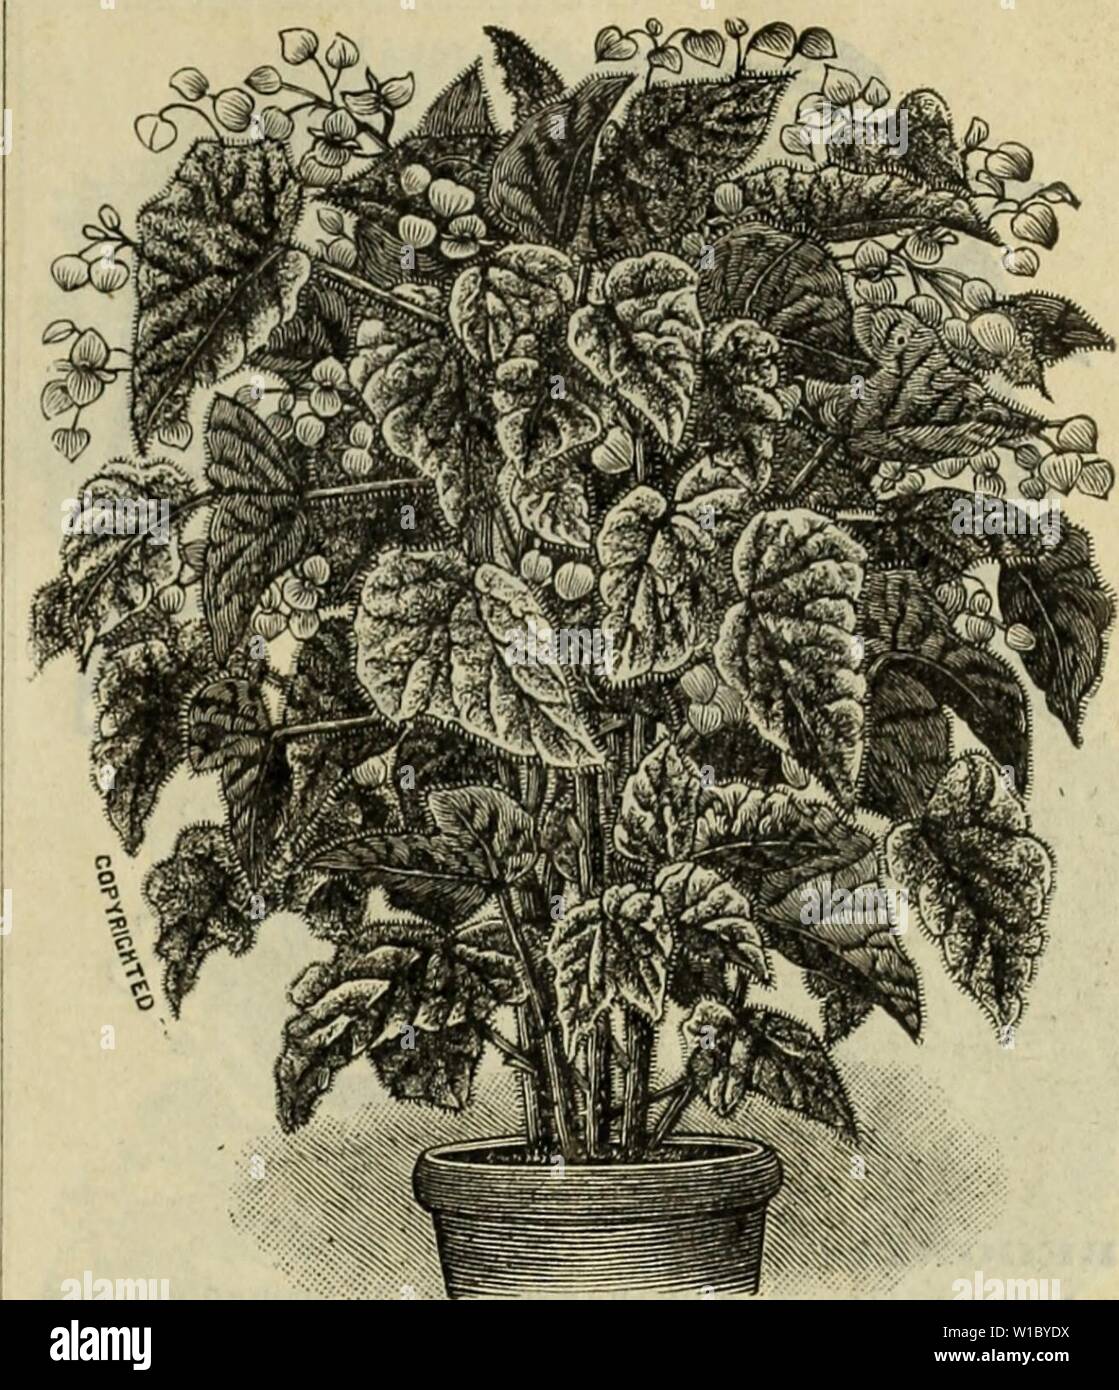 Archive image from page 48 of Descriptive catalogue  trees plants. Descriptive catalogue : trees plants seeds. . descriptivecatal1896bake Year: 1896  BEGONIA YKKNON.    BliGONIA METALLICA. President Caruot. A remarkably strong-grow- ing variety, of stiff, upright habit; foliage very large, flowers beautiful coral red, in large, penednt panicles similar to Rubras, but very much larger. 25 cts. Wettsteinii. (New.) This fine Begonia is in the direct line of Rubra, so well and favorably known. The leaf is ornamental, being peculiarly indented, and a lovely shaded coloring, dark marbled green, shad Stock Photo